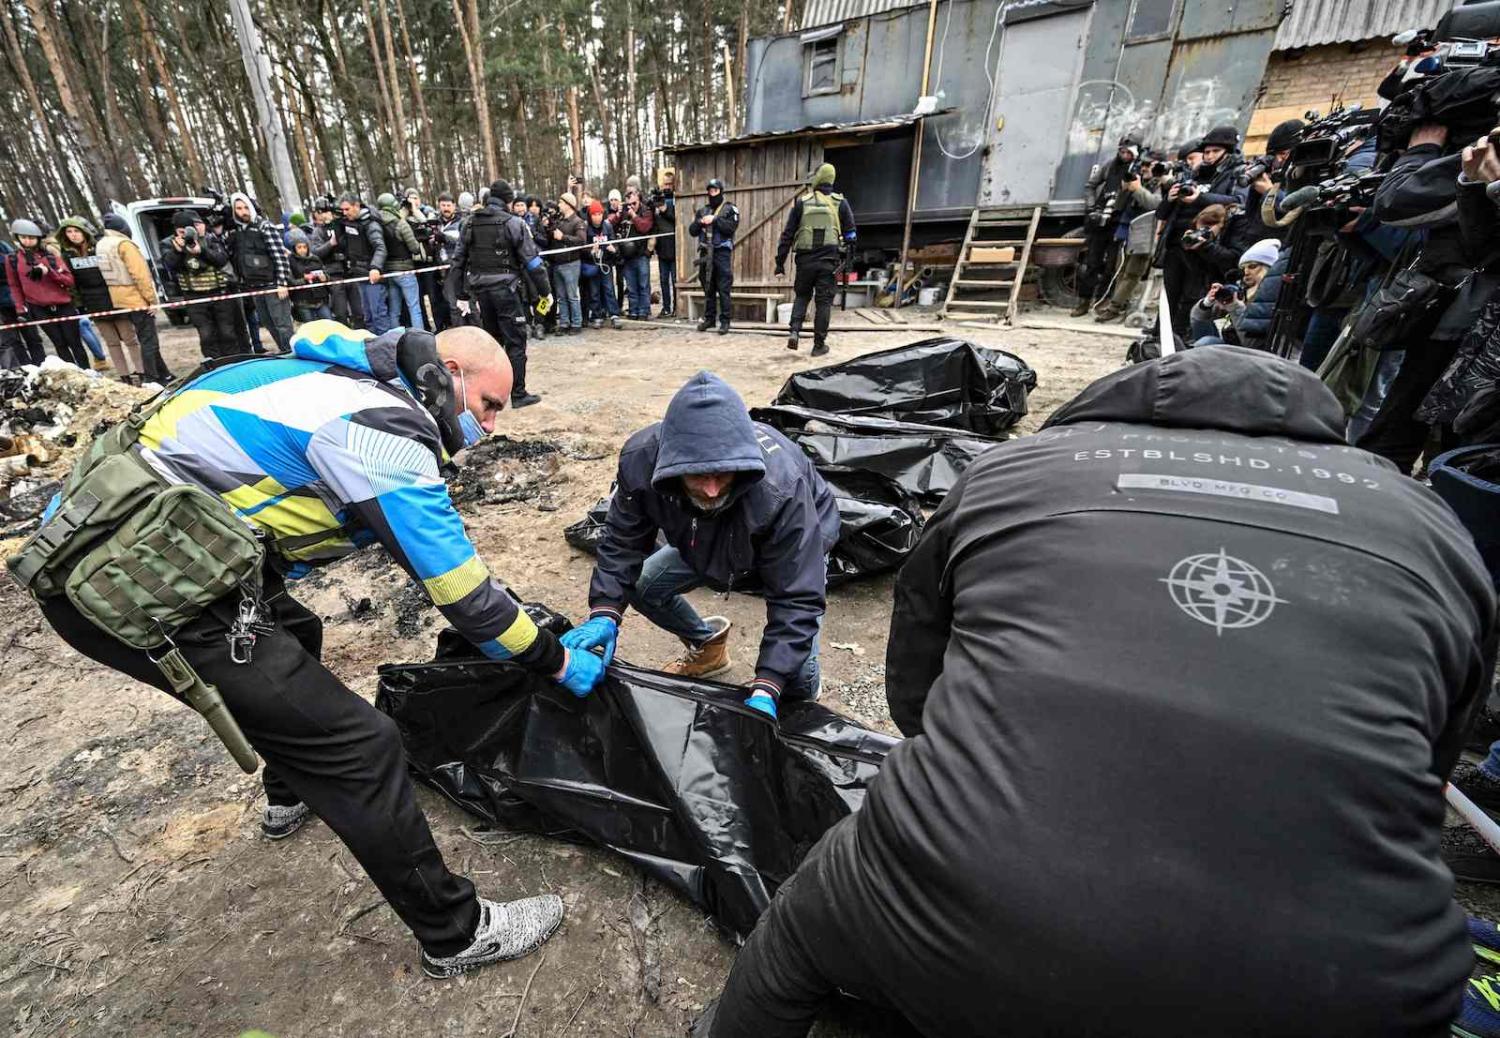 Journalists lined up against a taped off area while human remains are lifted into body bags in the Ukrainian town of Bucha on 5 April (Genya SAVILOV/AFP via Getty Images)